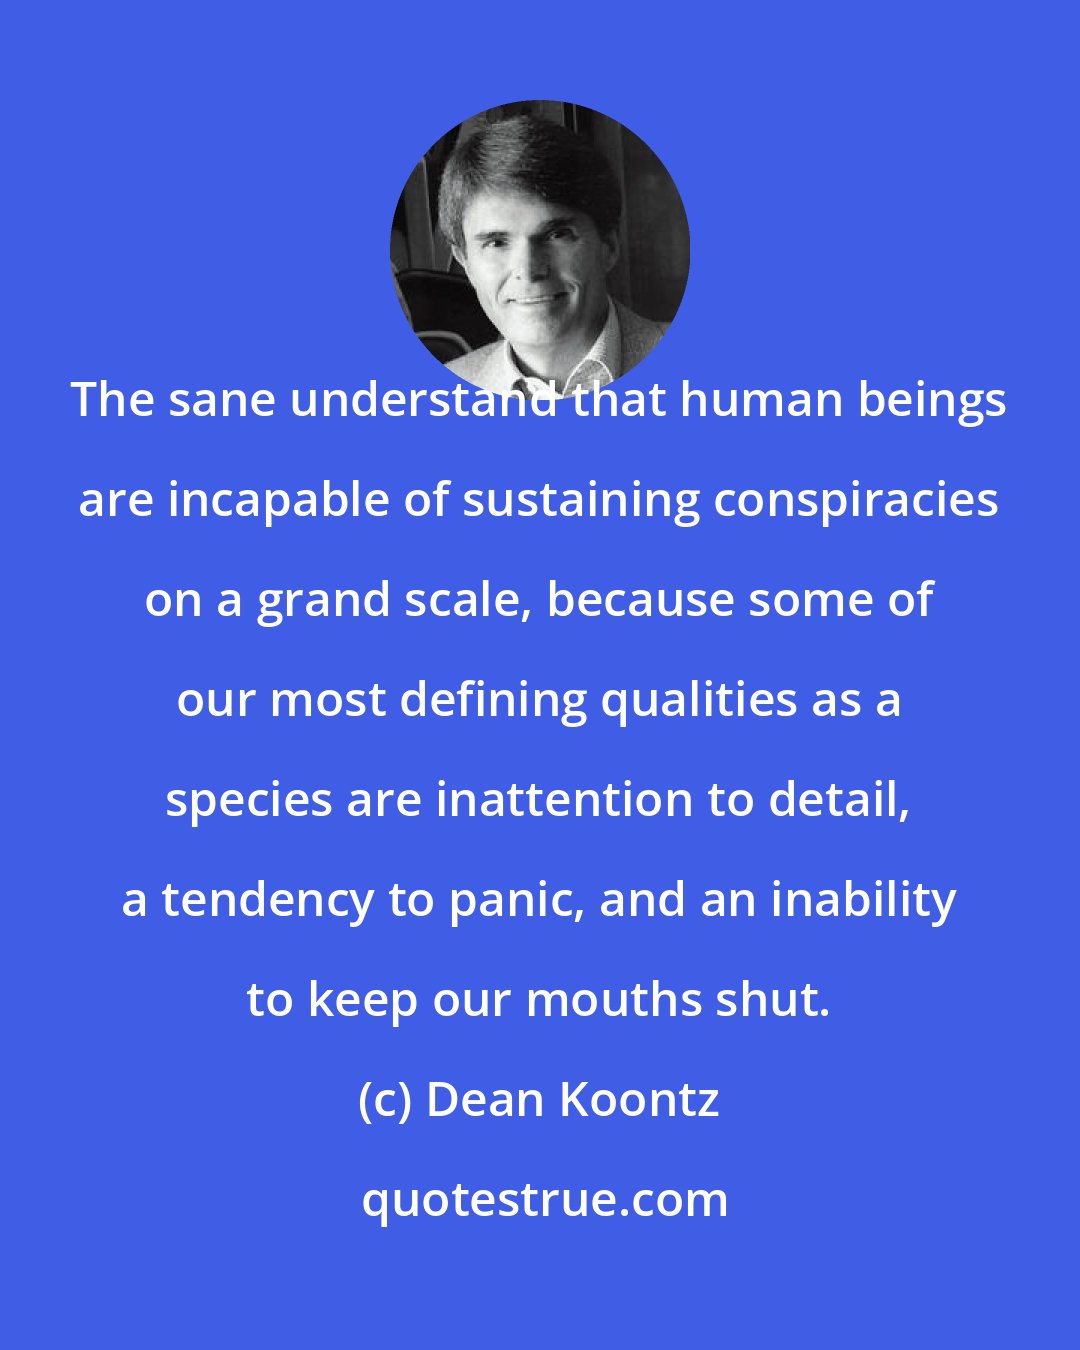 Dean Koontz: The sane understand that human beings are incapable of sustaining conspiracies on a grand scale, because some of our most defining qualities as a species are inattention to detail, a tendency to panic, and an inability to keep our mouths shut.